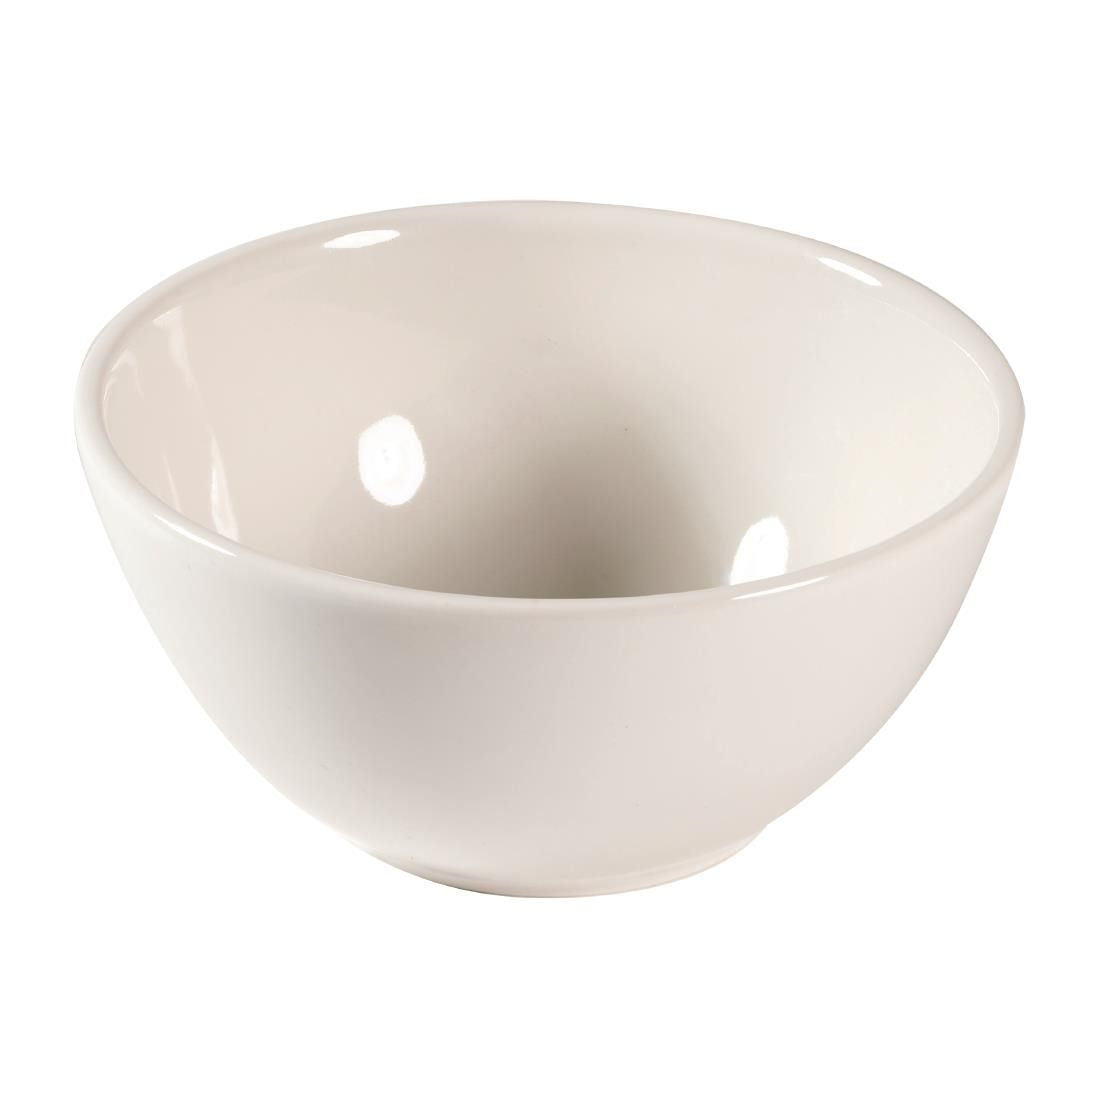 FA690 Churchill Profile Snack Bowls White 14oz 130mm (Pack of 12) JD Catering Equipment Solutions Ltd